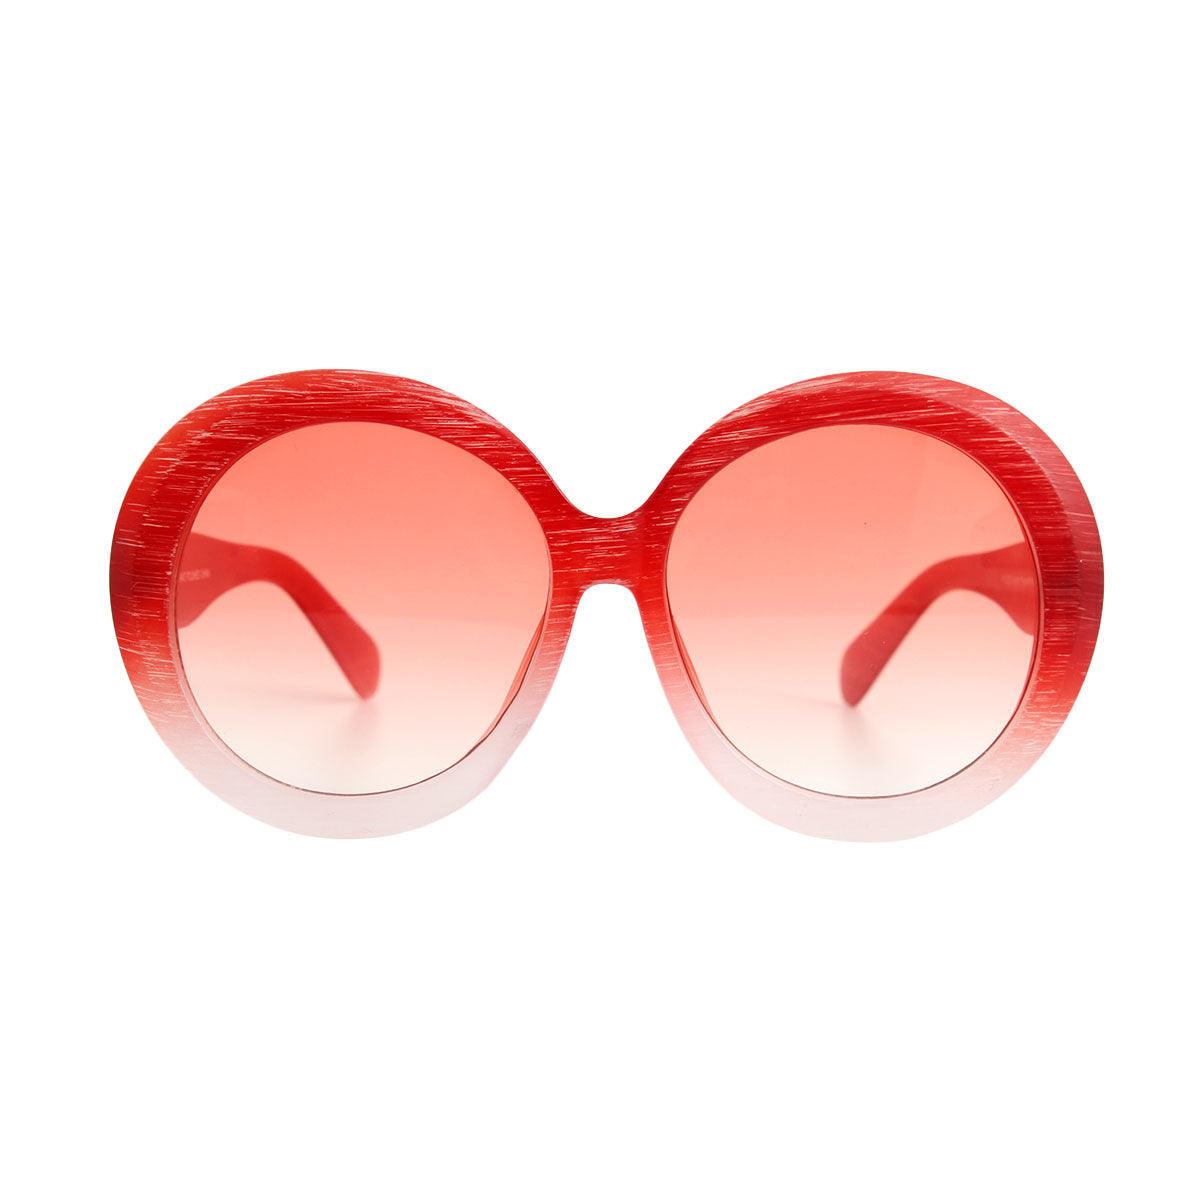 Sunglasses Women Candy Color Red Plastic